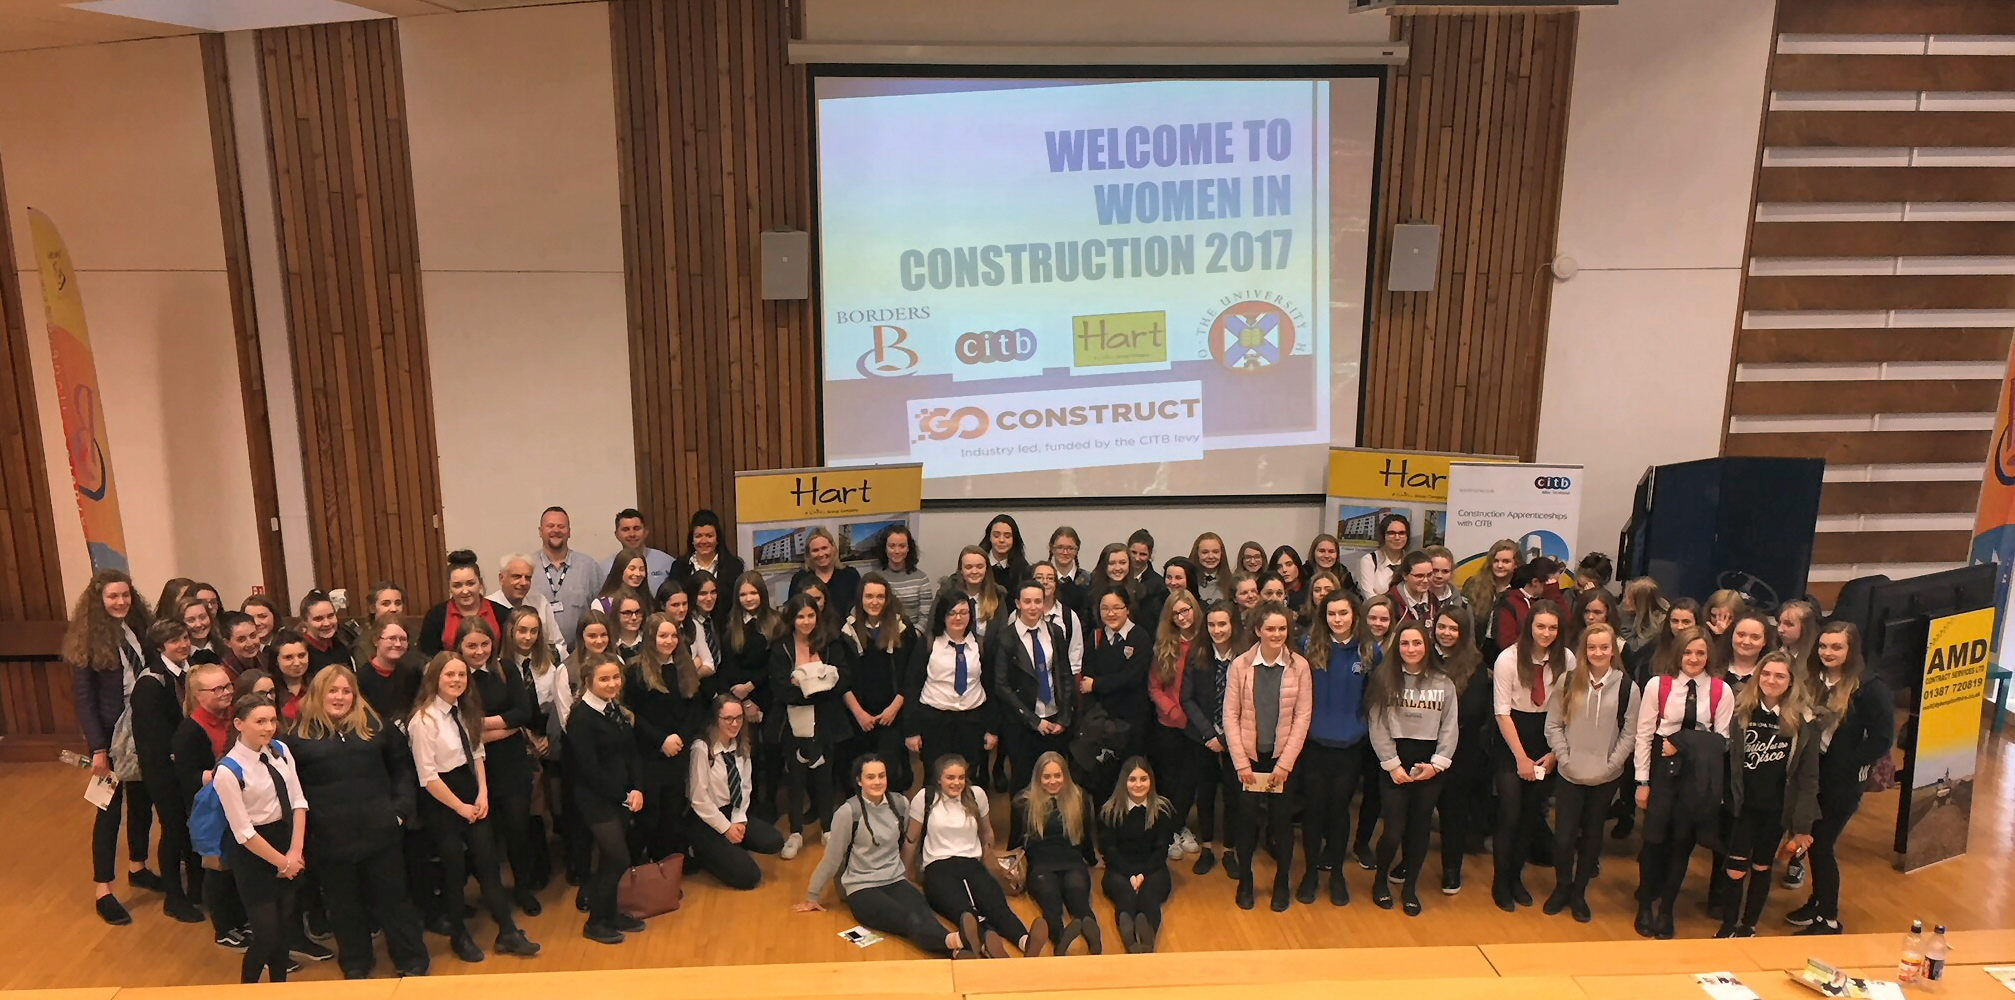 Pupils, staff and presenters at the Women in Construction 2017 presentation